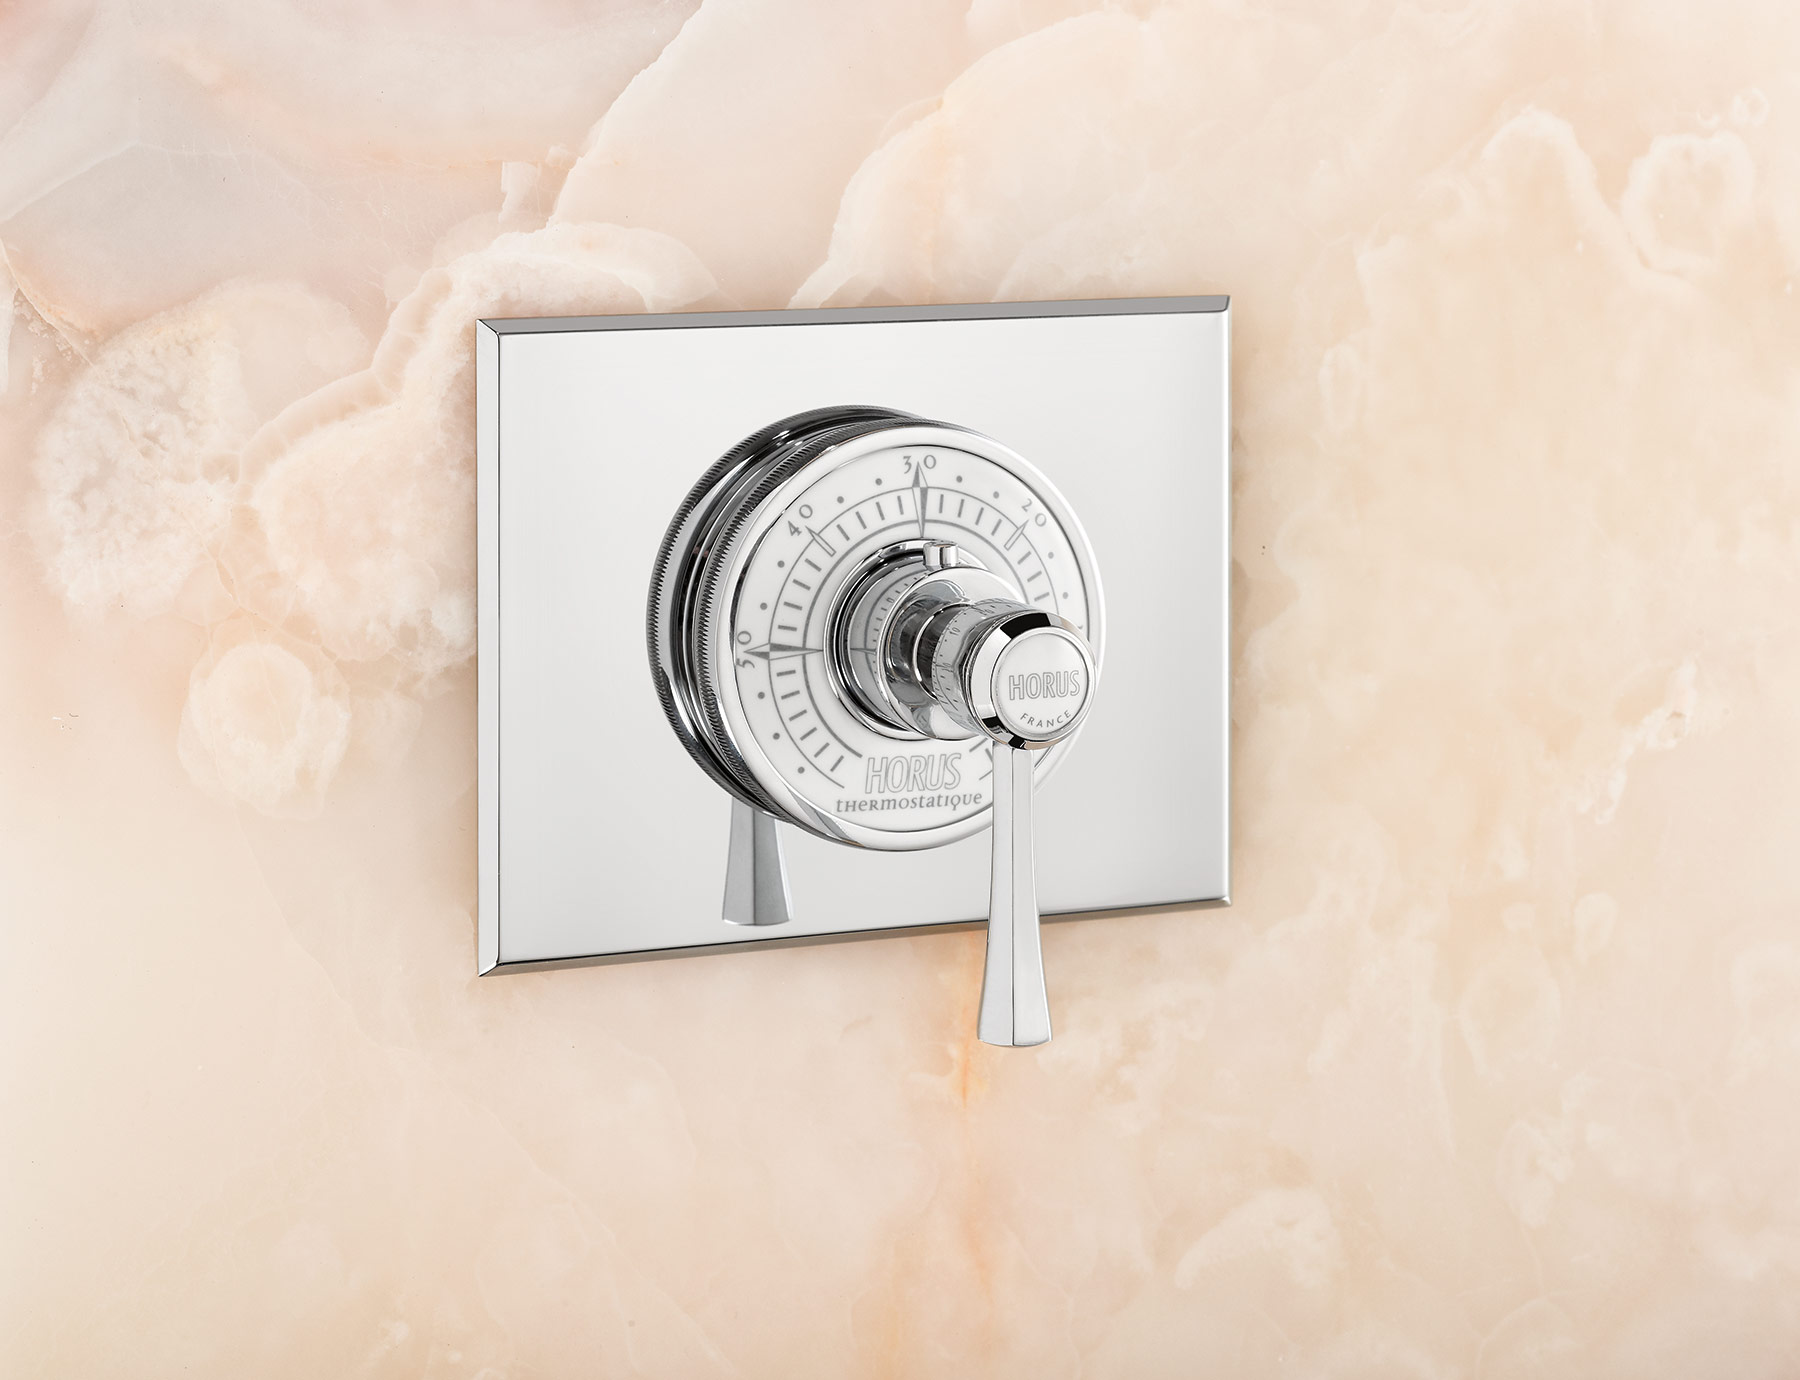 Traditional Ascott Wall Mount Thermostatic Mixer